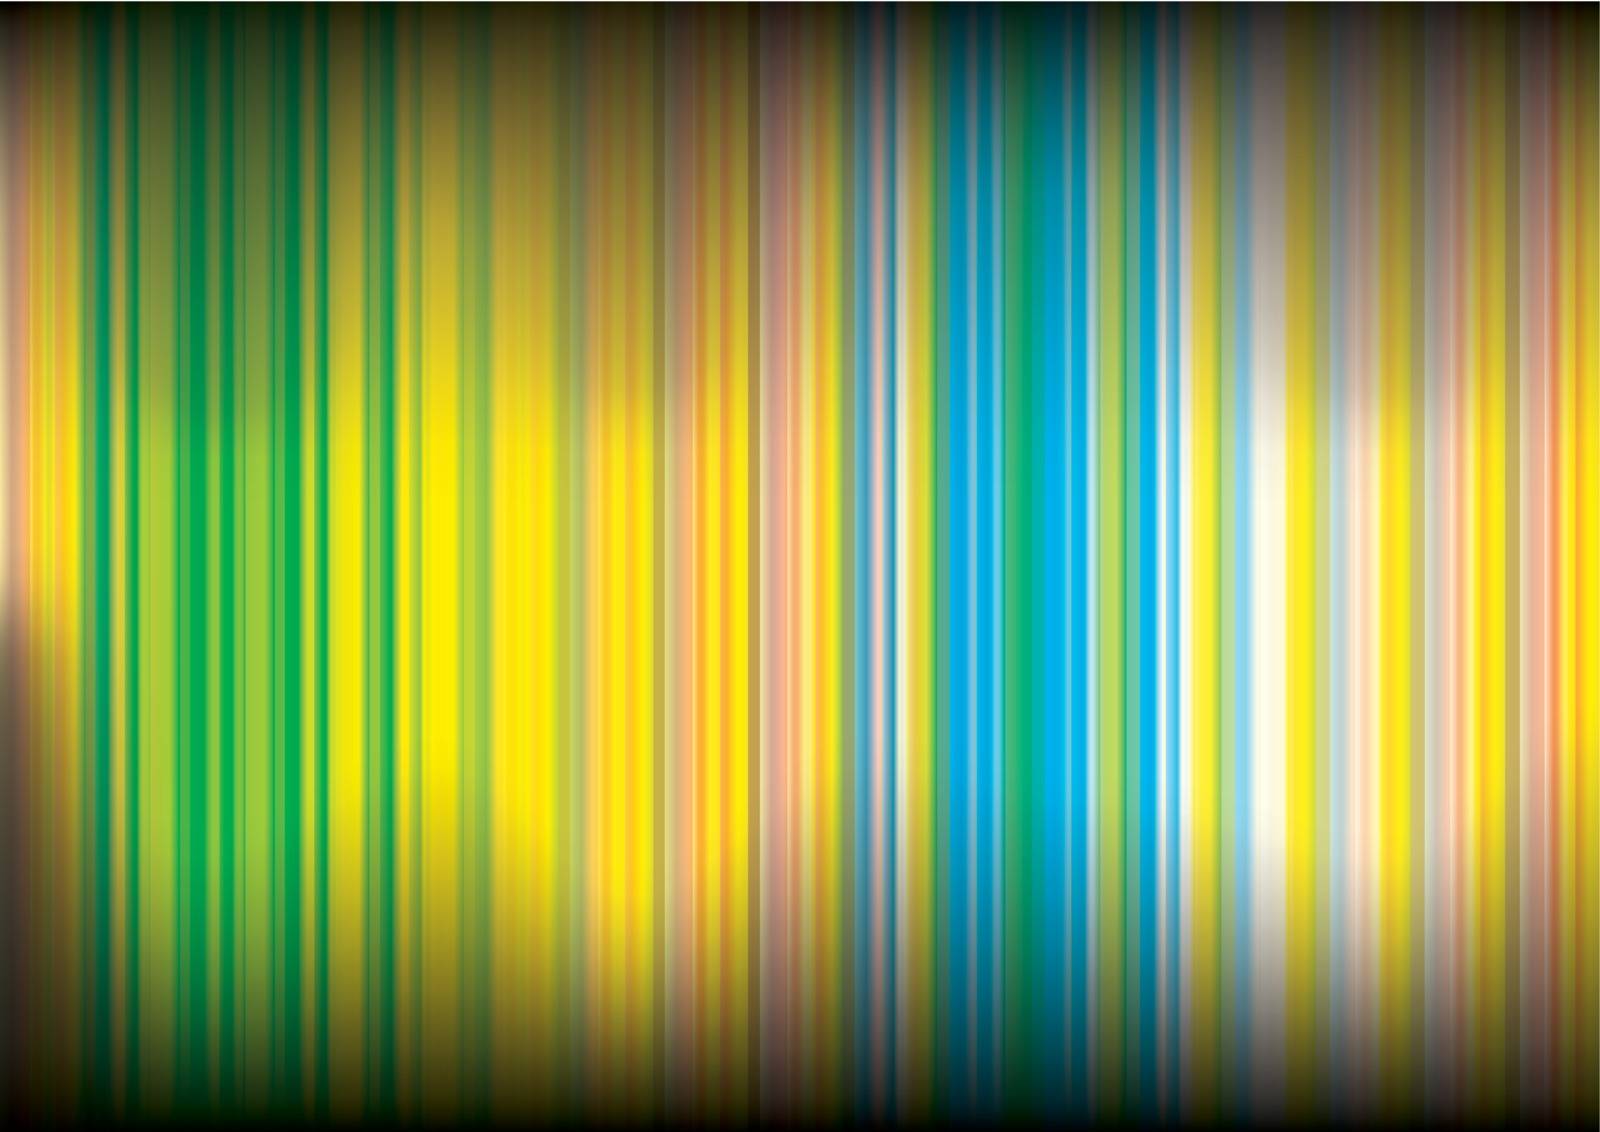 Colorful abstract lines with a darker gradient eps 10